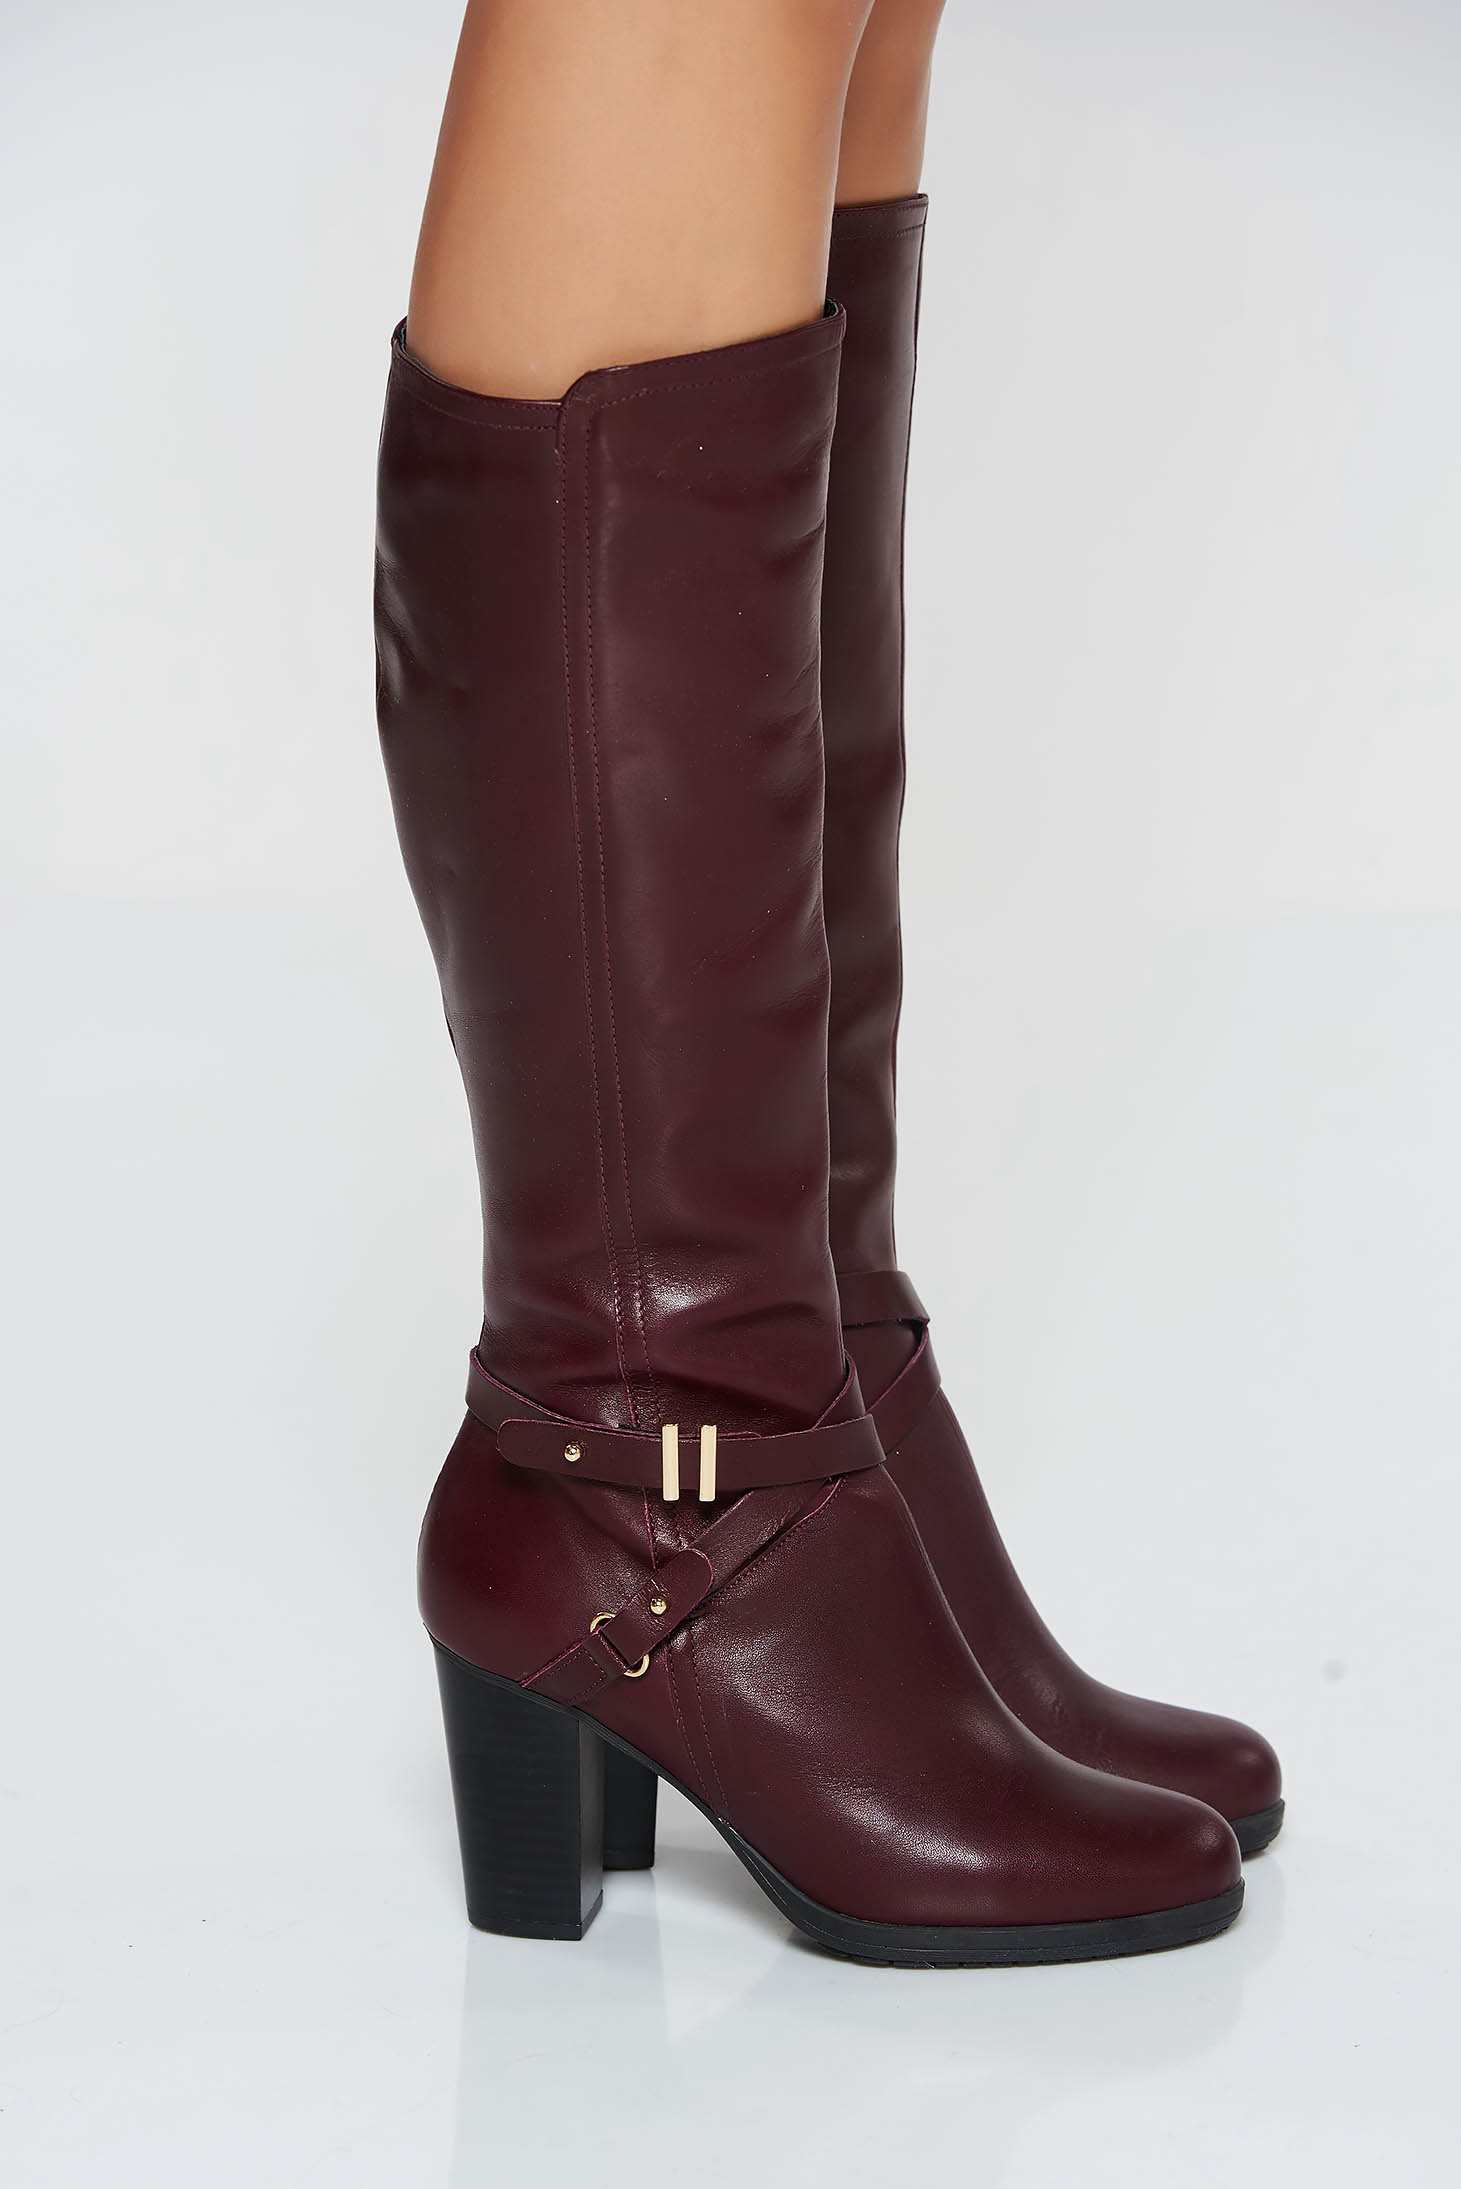 office burgundy boots